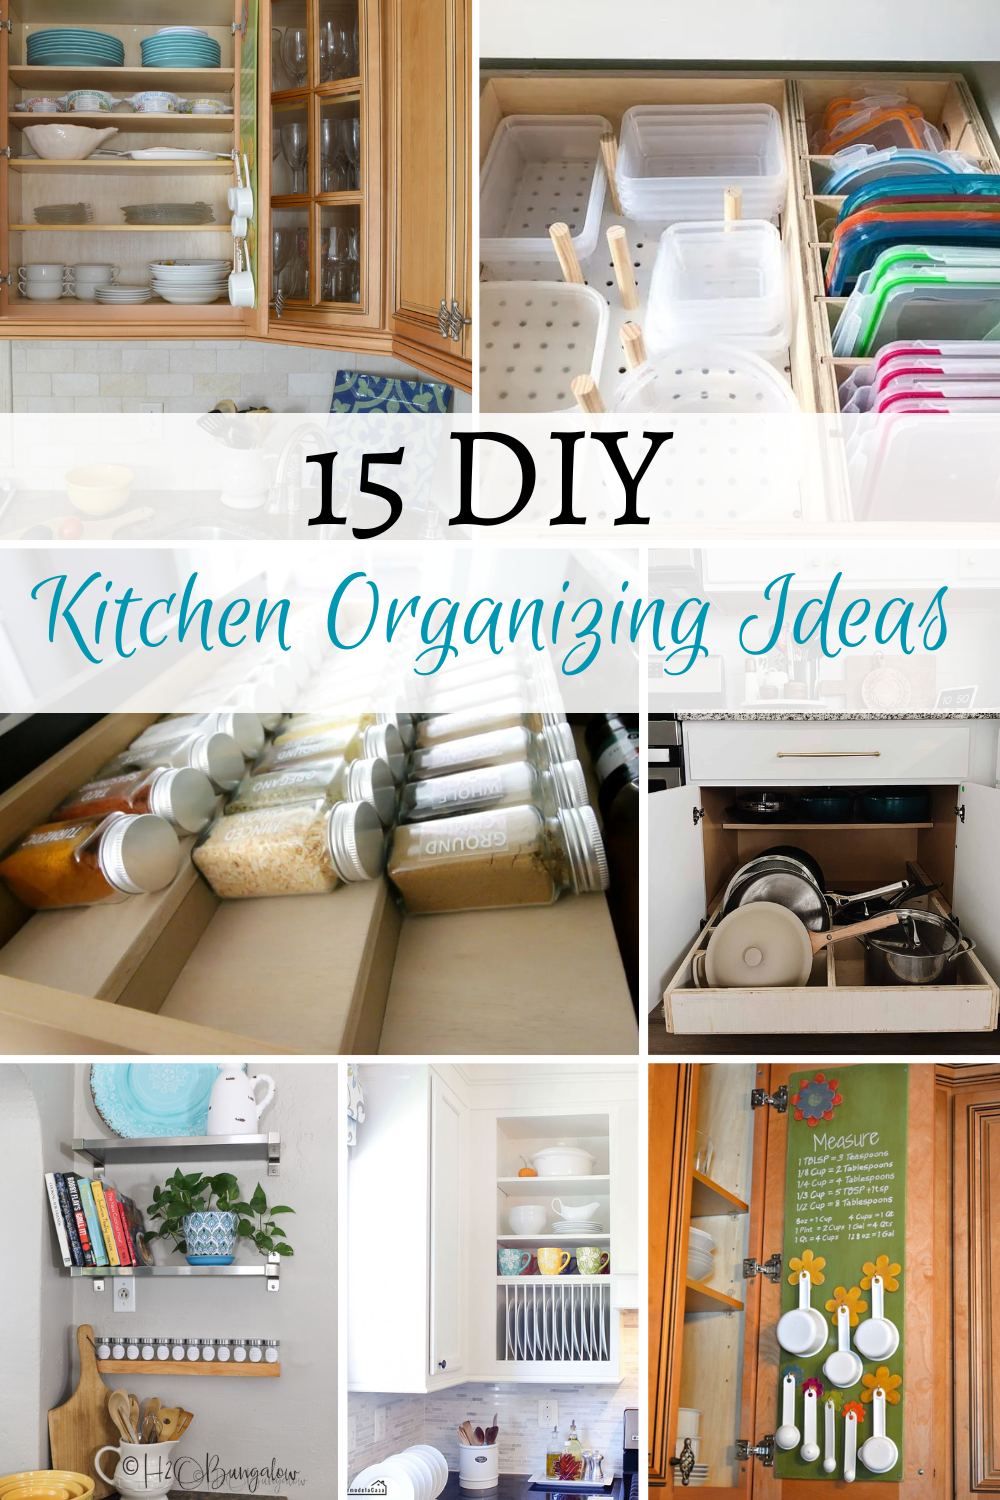 image collage of seven DIY kitchen organizing ideas with text overlay